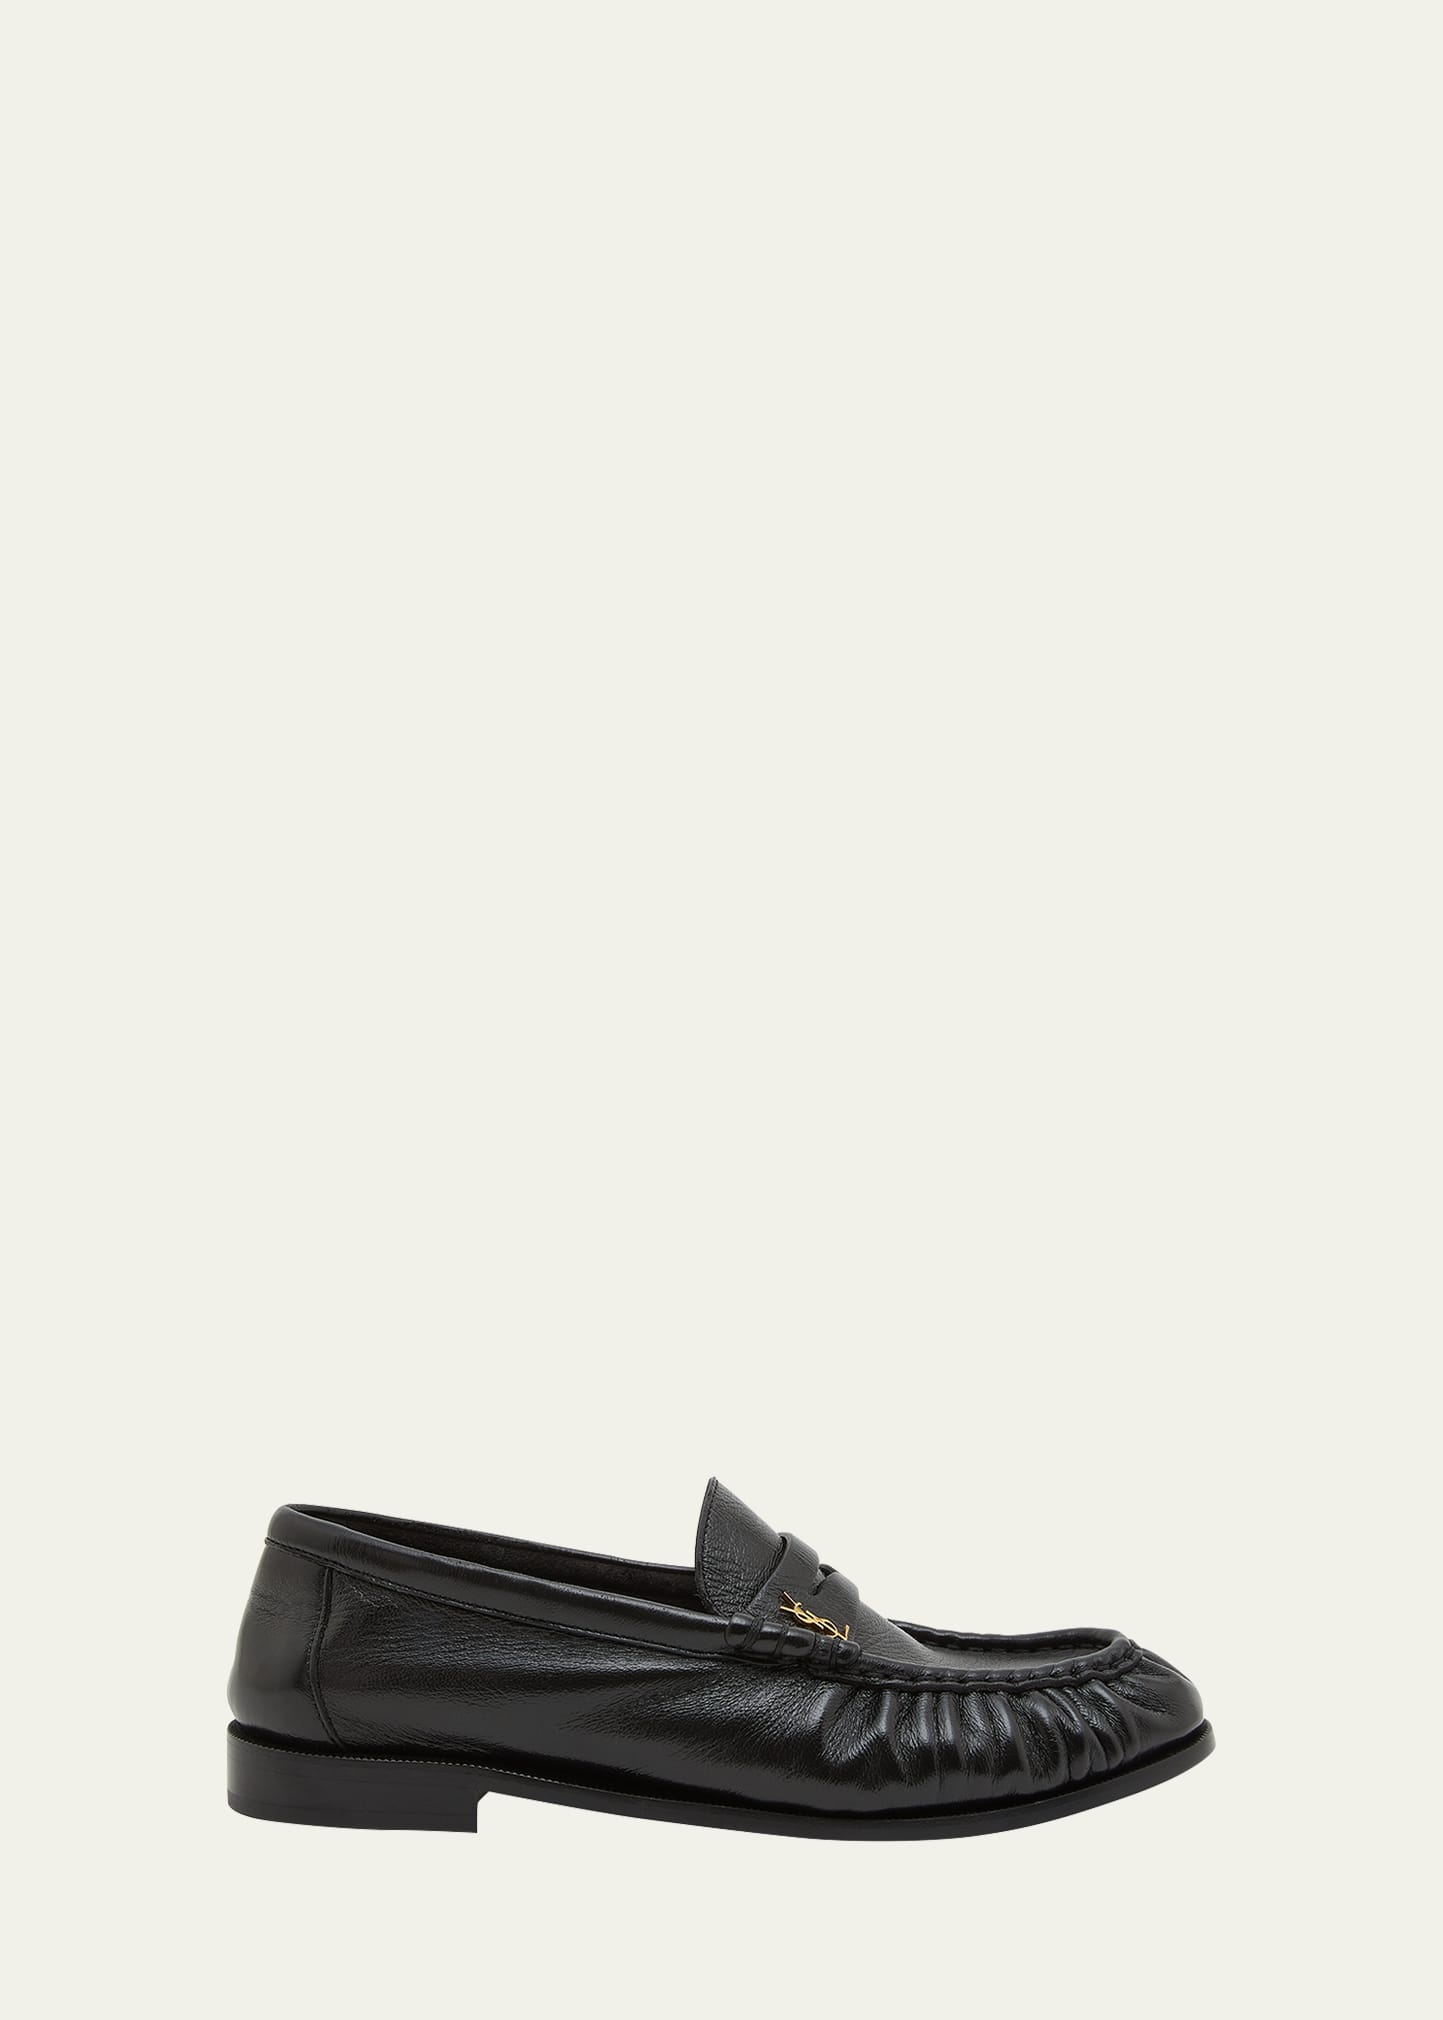 Saint Laurent Le Leather YSL Penny Loafers | Bergdorf Goodman